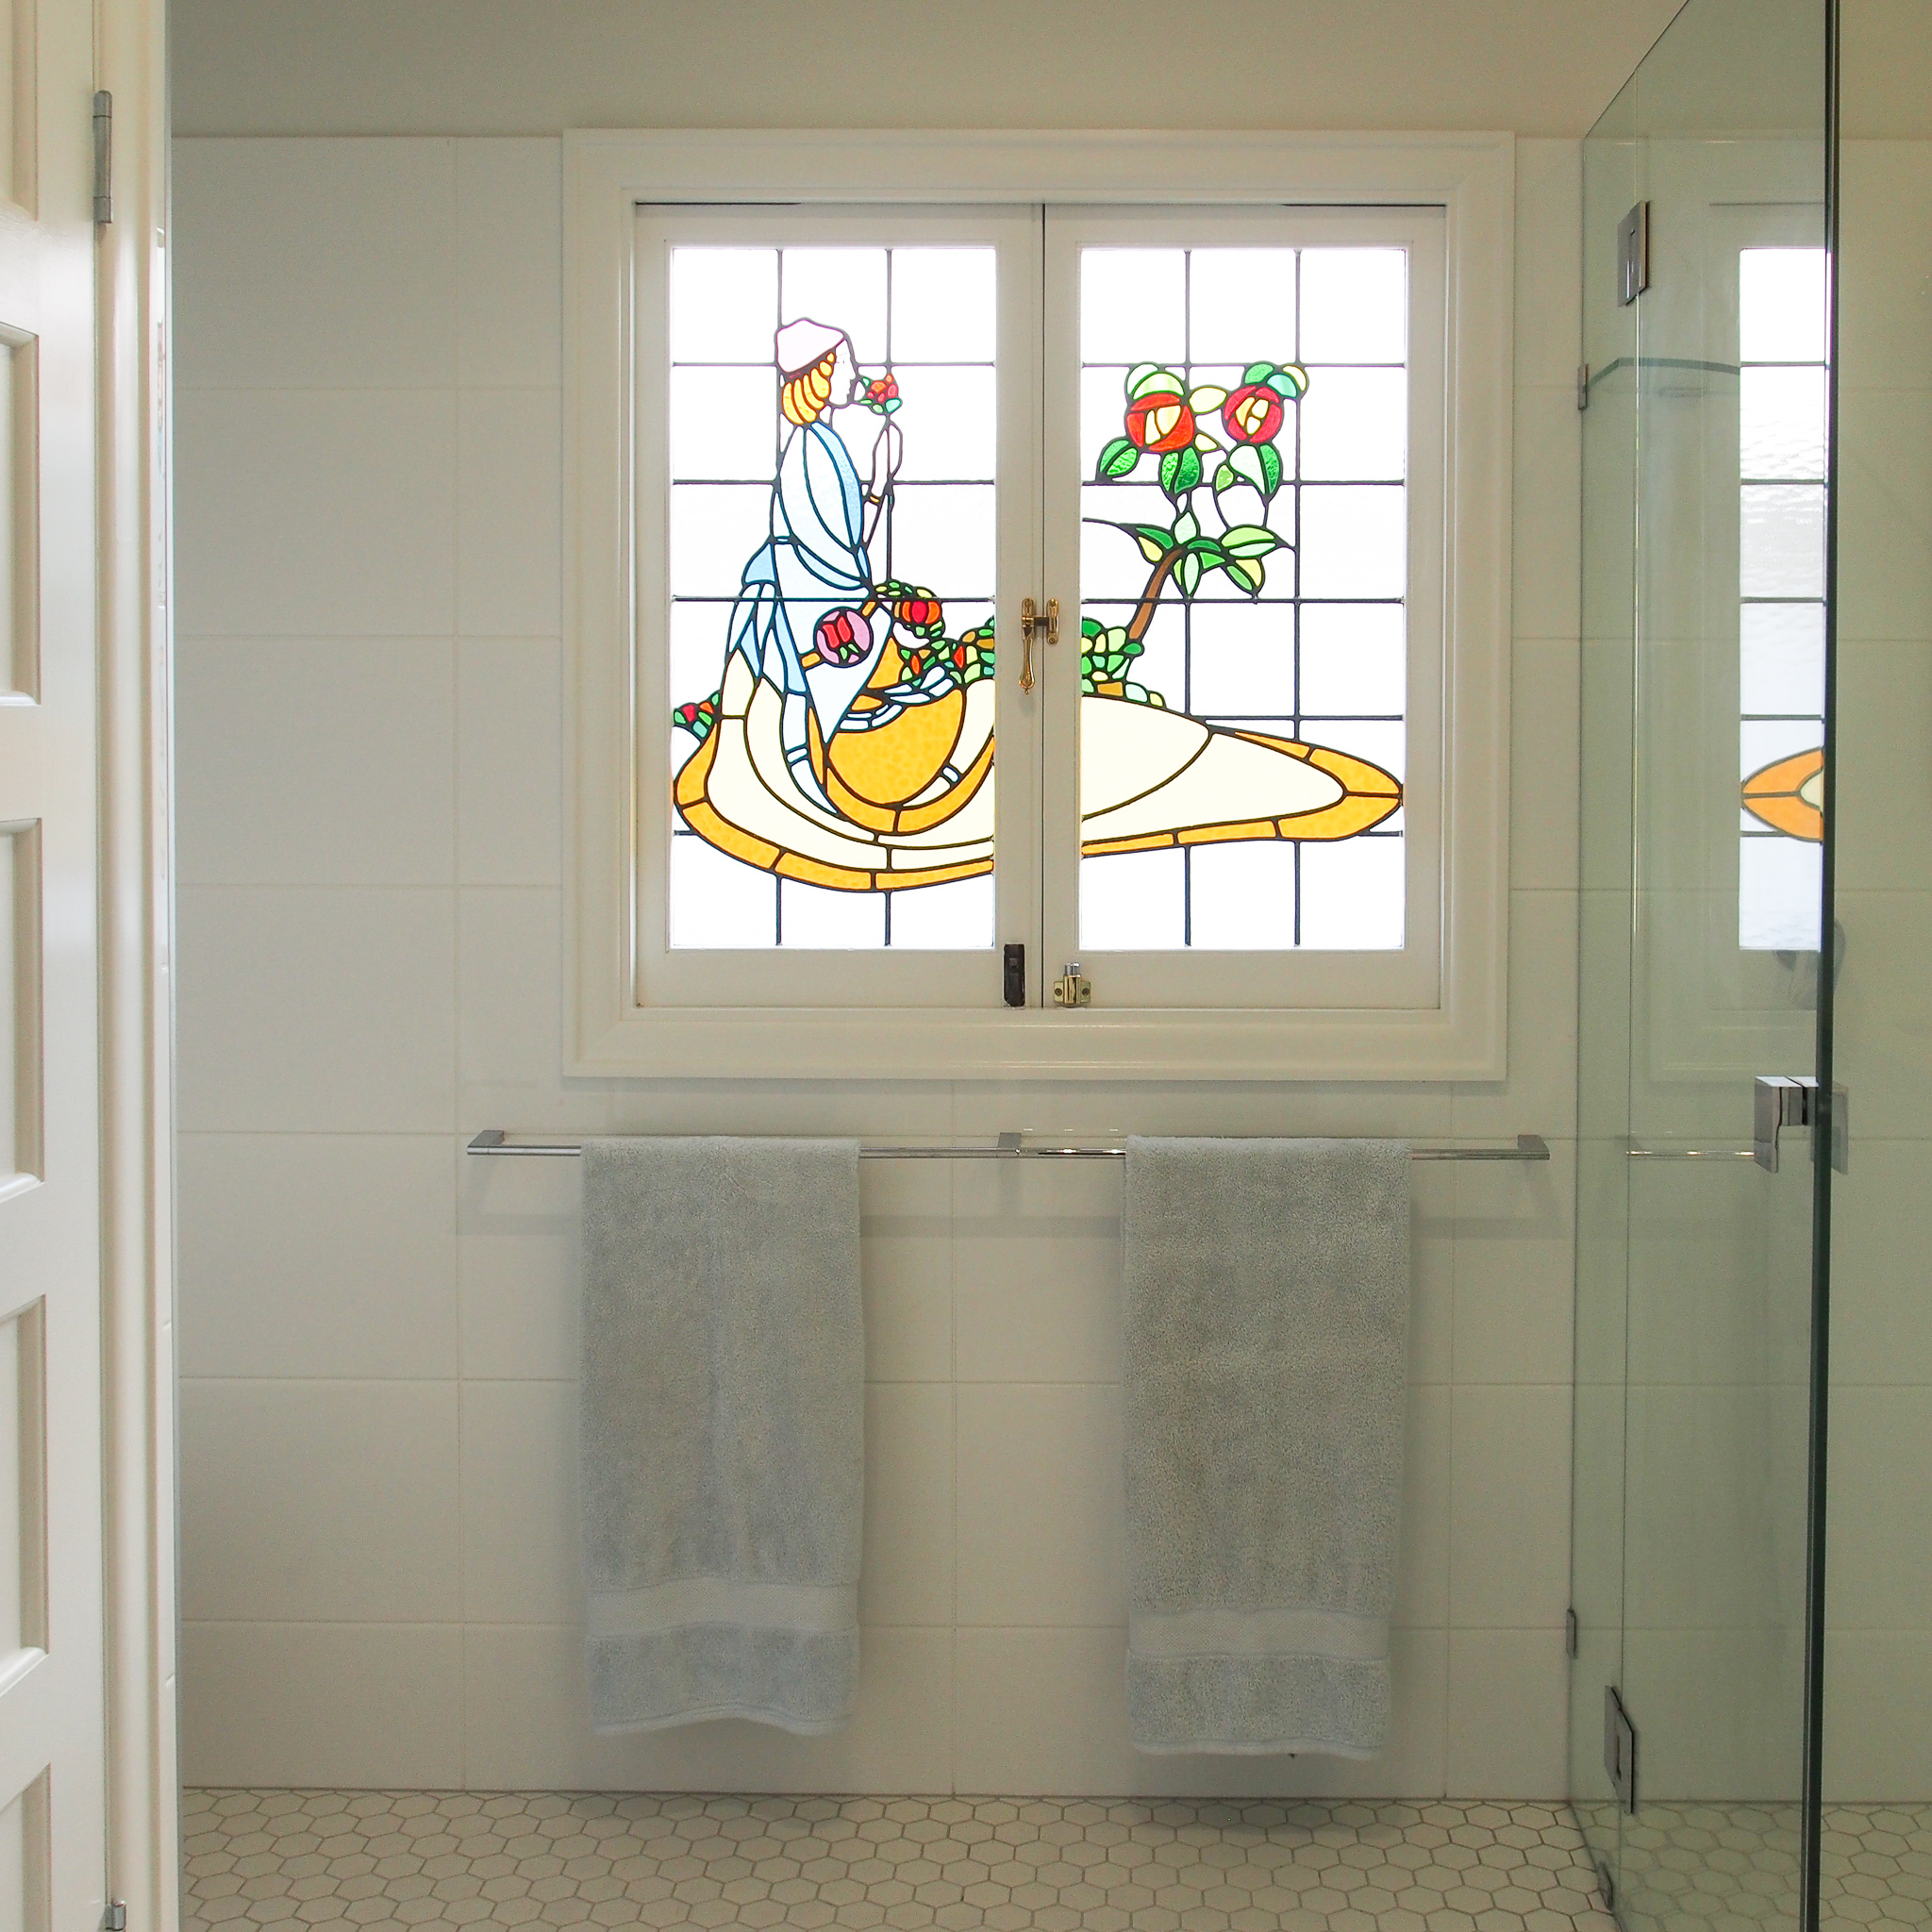 The original stained glass window creates a focal point in this bathroom, and is accentuated by the smart choice of white tiles and fittings Stained glass window feature